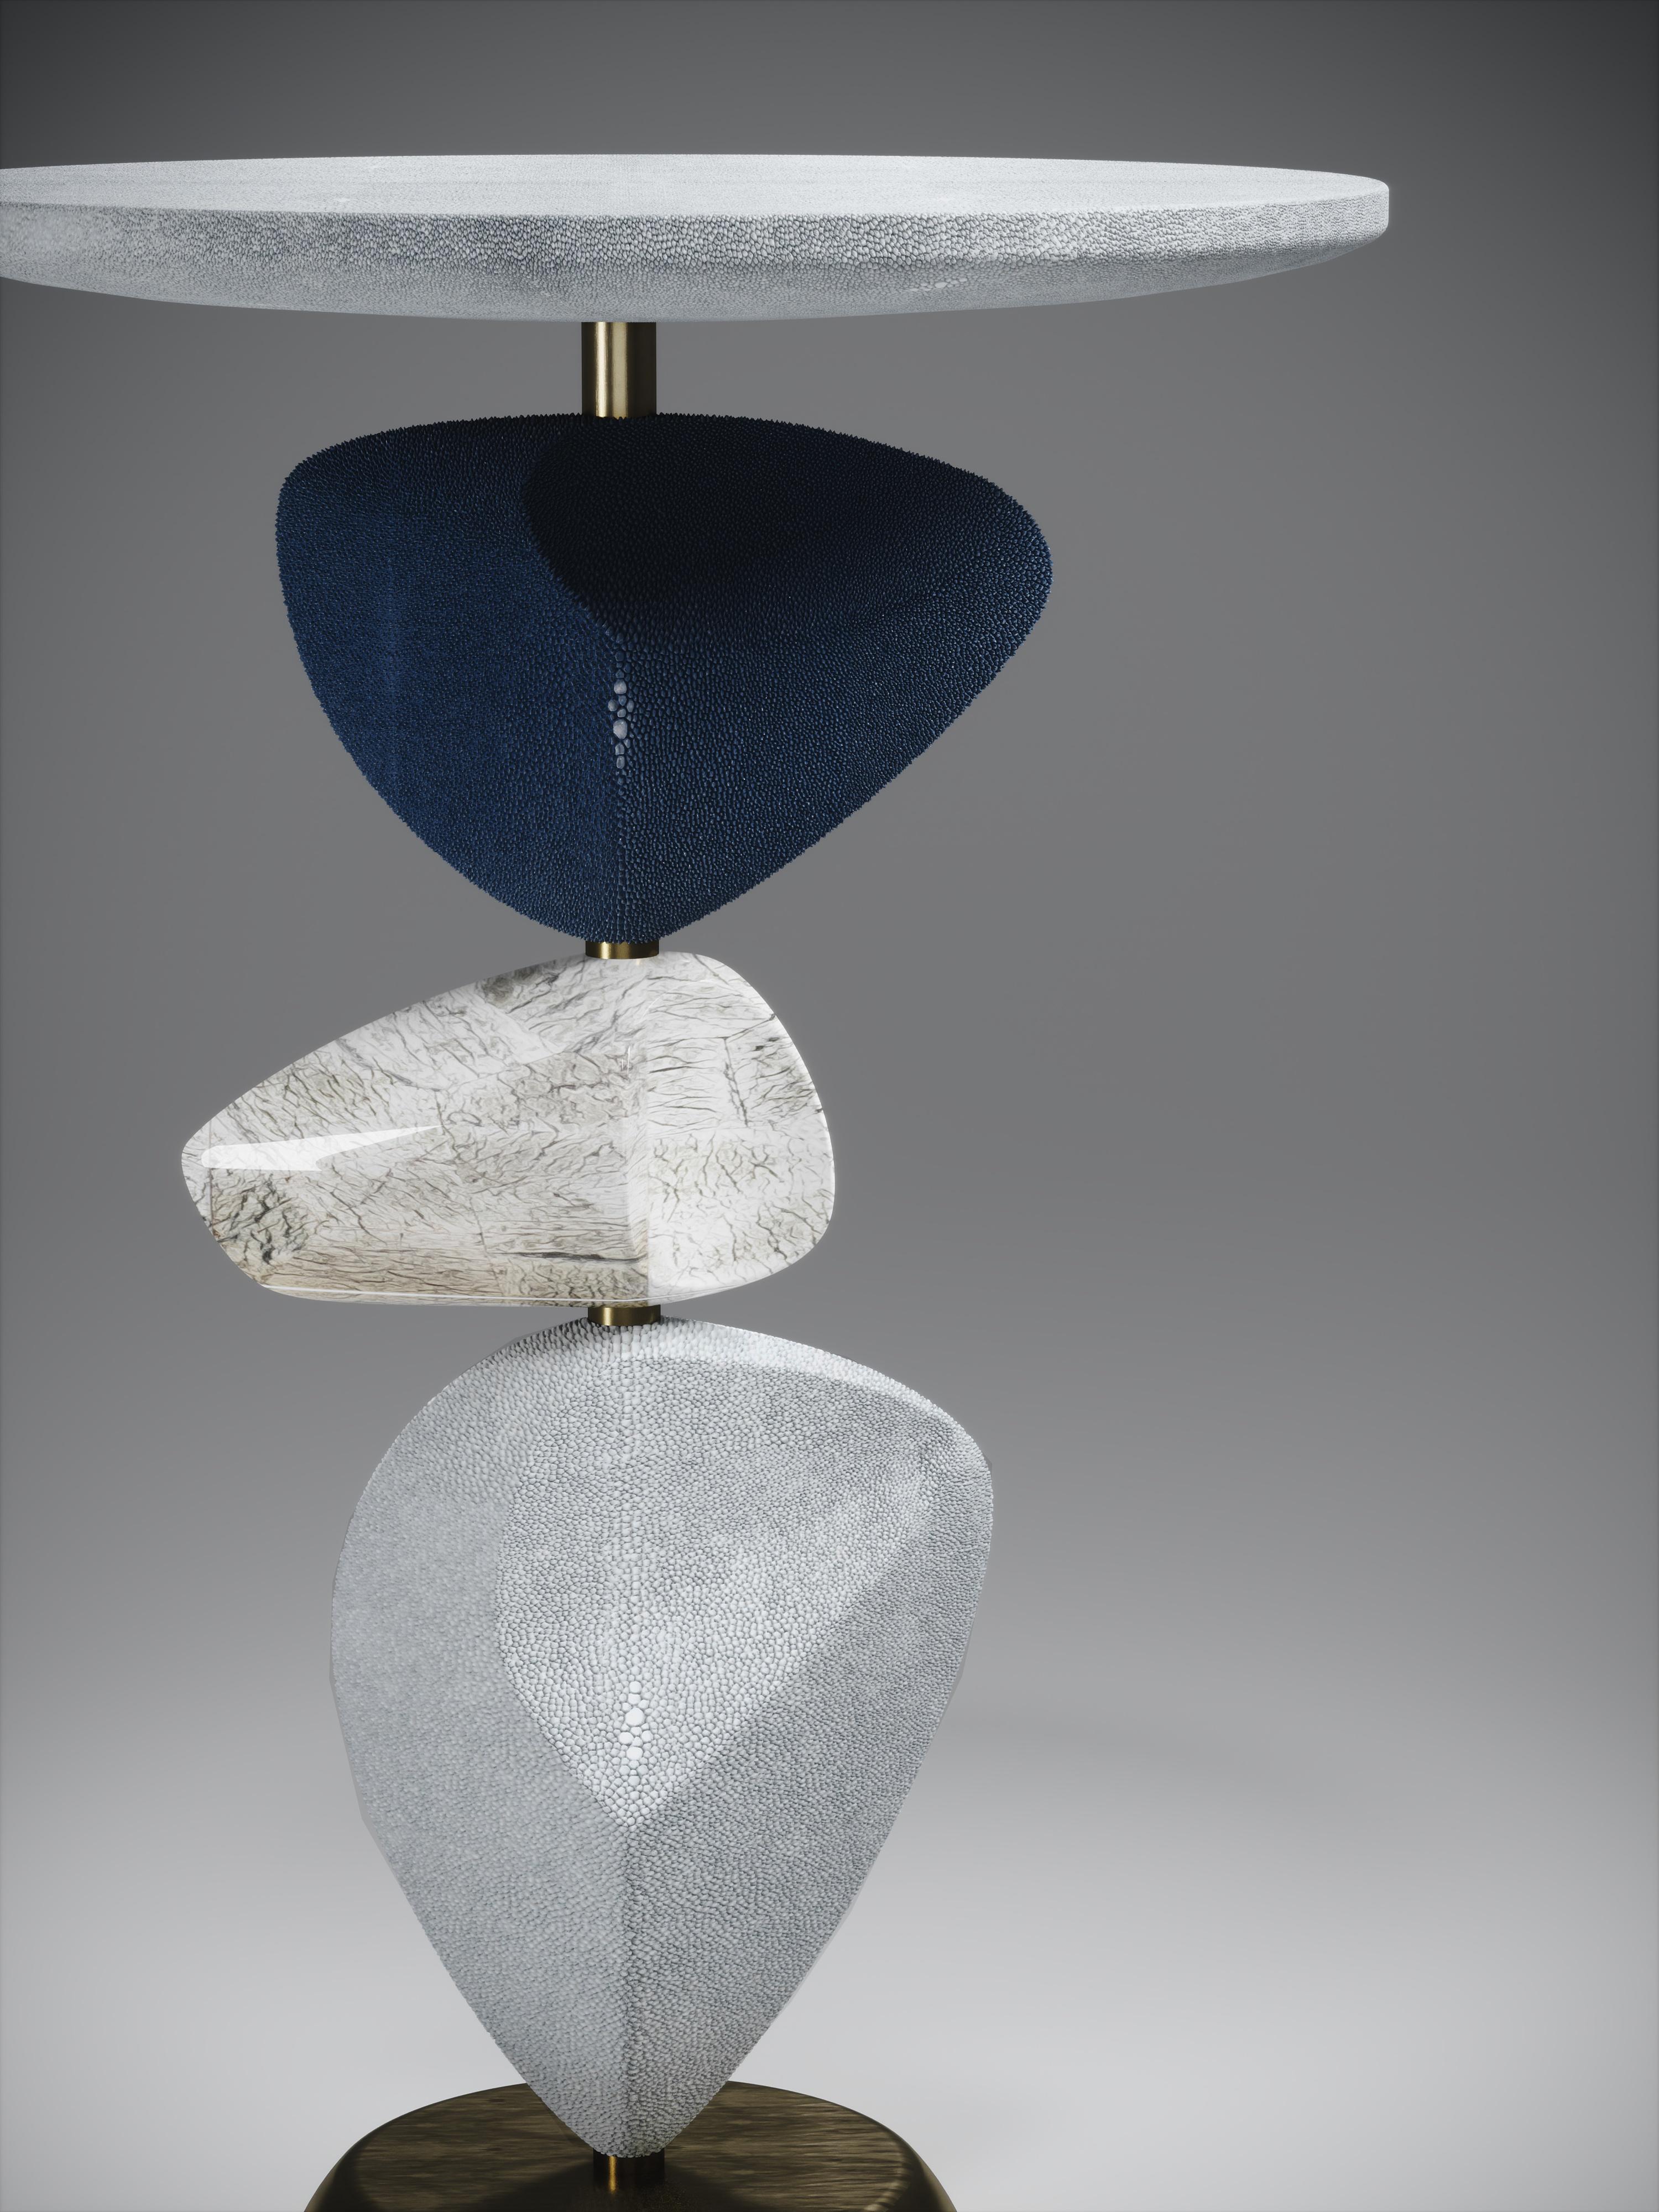 The Cosmo moon side table by Kifu Paris is a whimsical and sculptural piece, inlaid in pale grey blue shagreen shagreen, denim blue shagreen, baguio stone and bronze-patina brass. This piece is a sister to the original Cosmo Side Table by Kifu